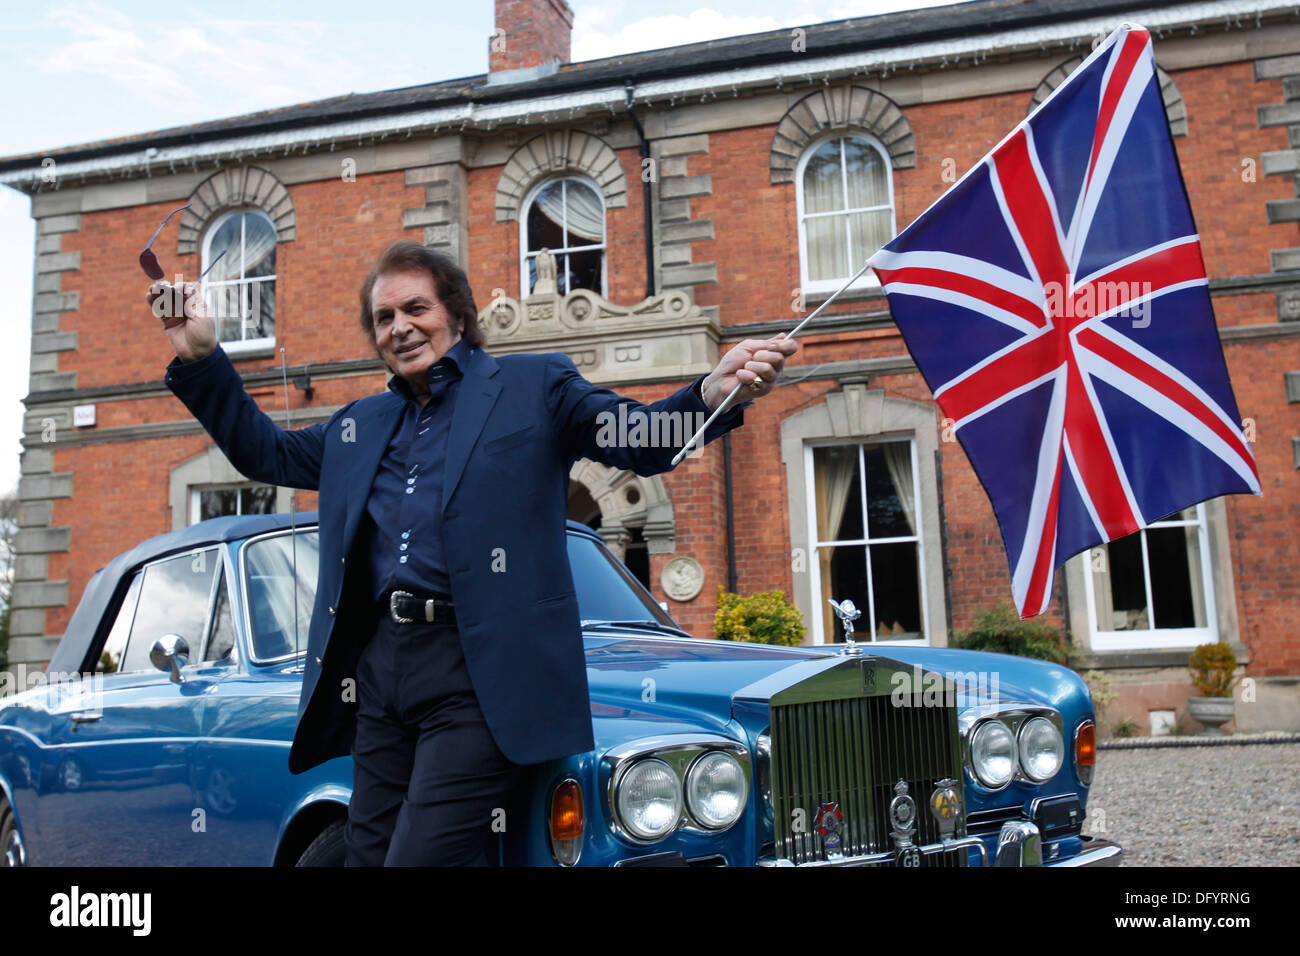 British pop singer Engelbert Humperdinck poses for a photograph next to his car and a Union Jack flag during a photocall Stock Photo